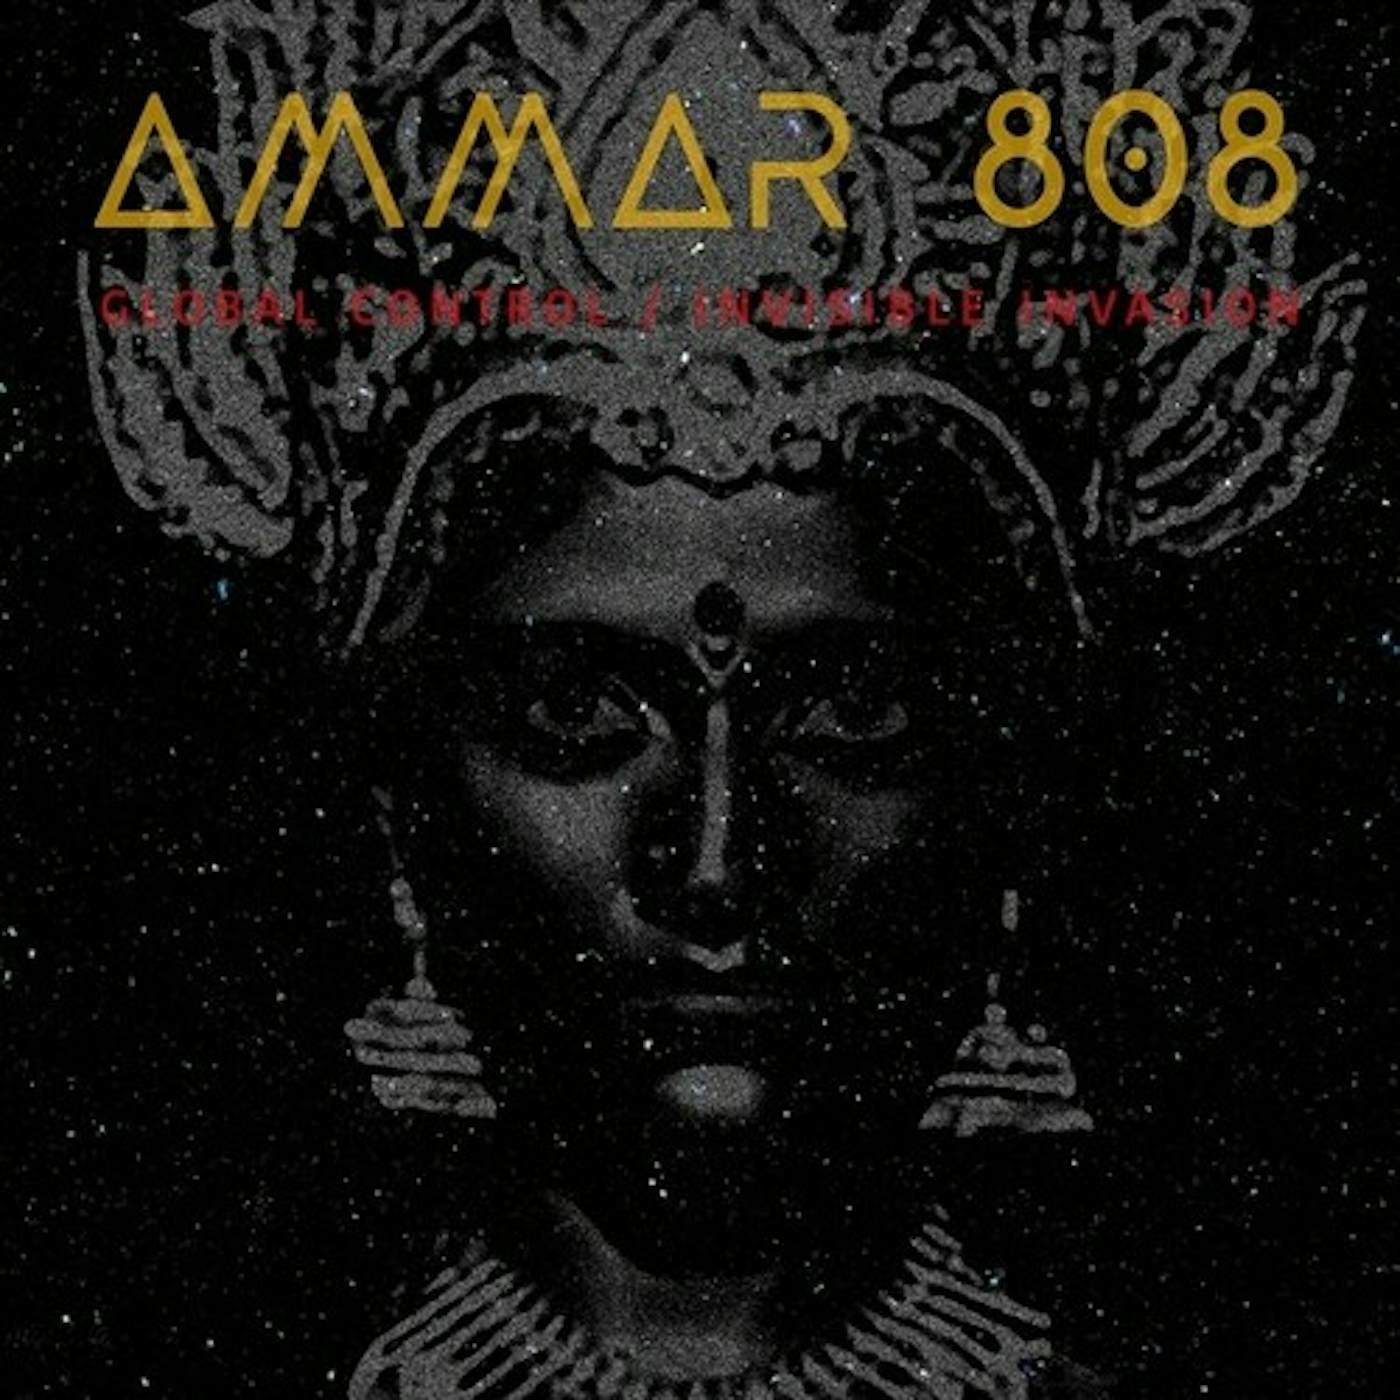 Ammar 808 GLOBAL CONTROL / INVISIBLE INVASION CD